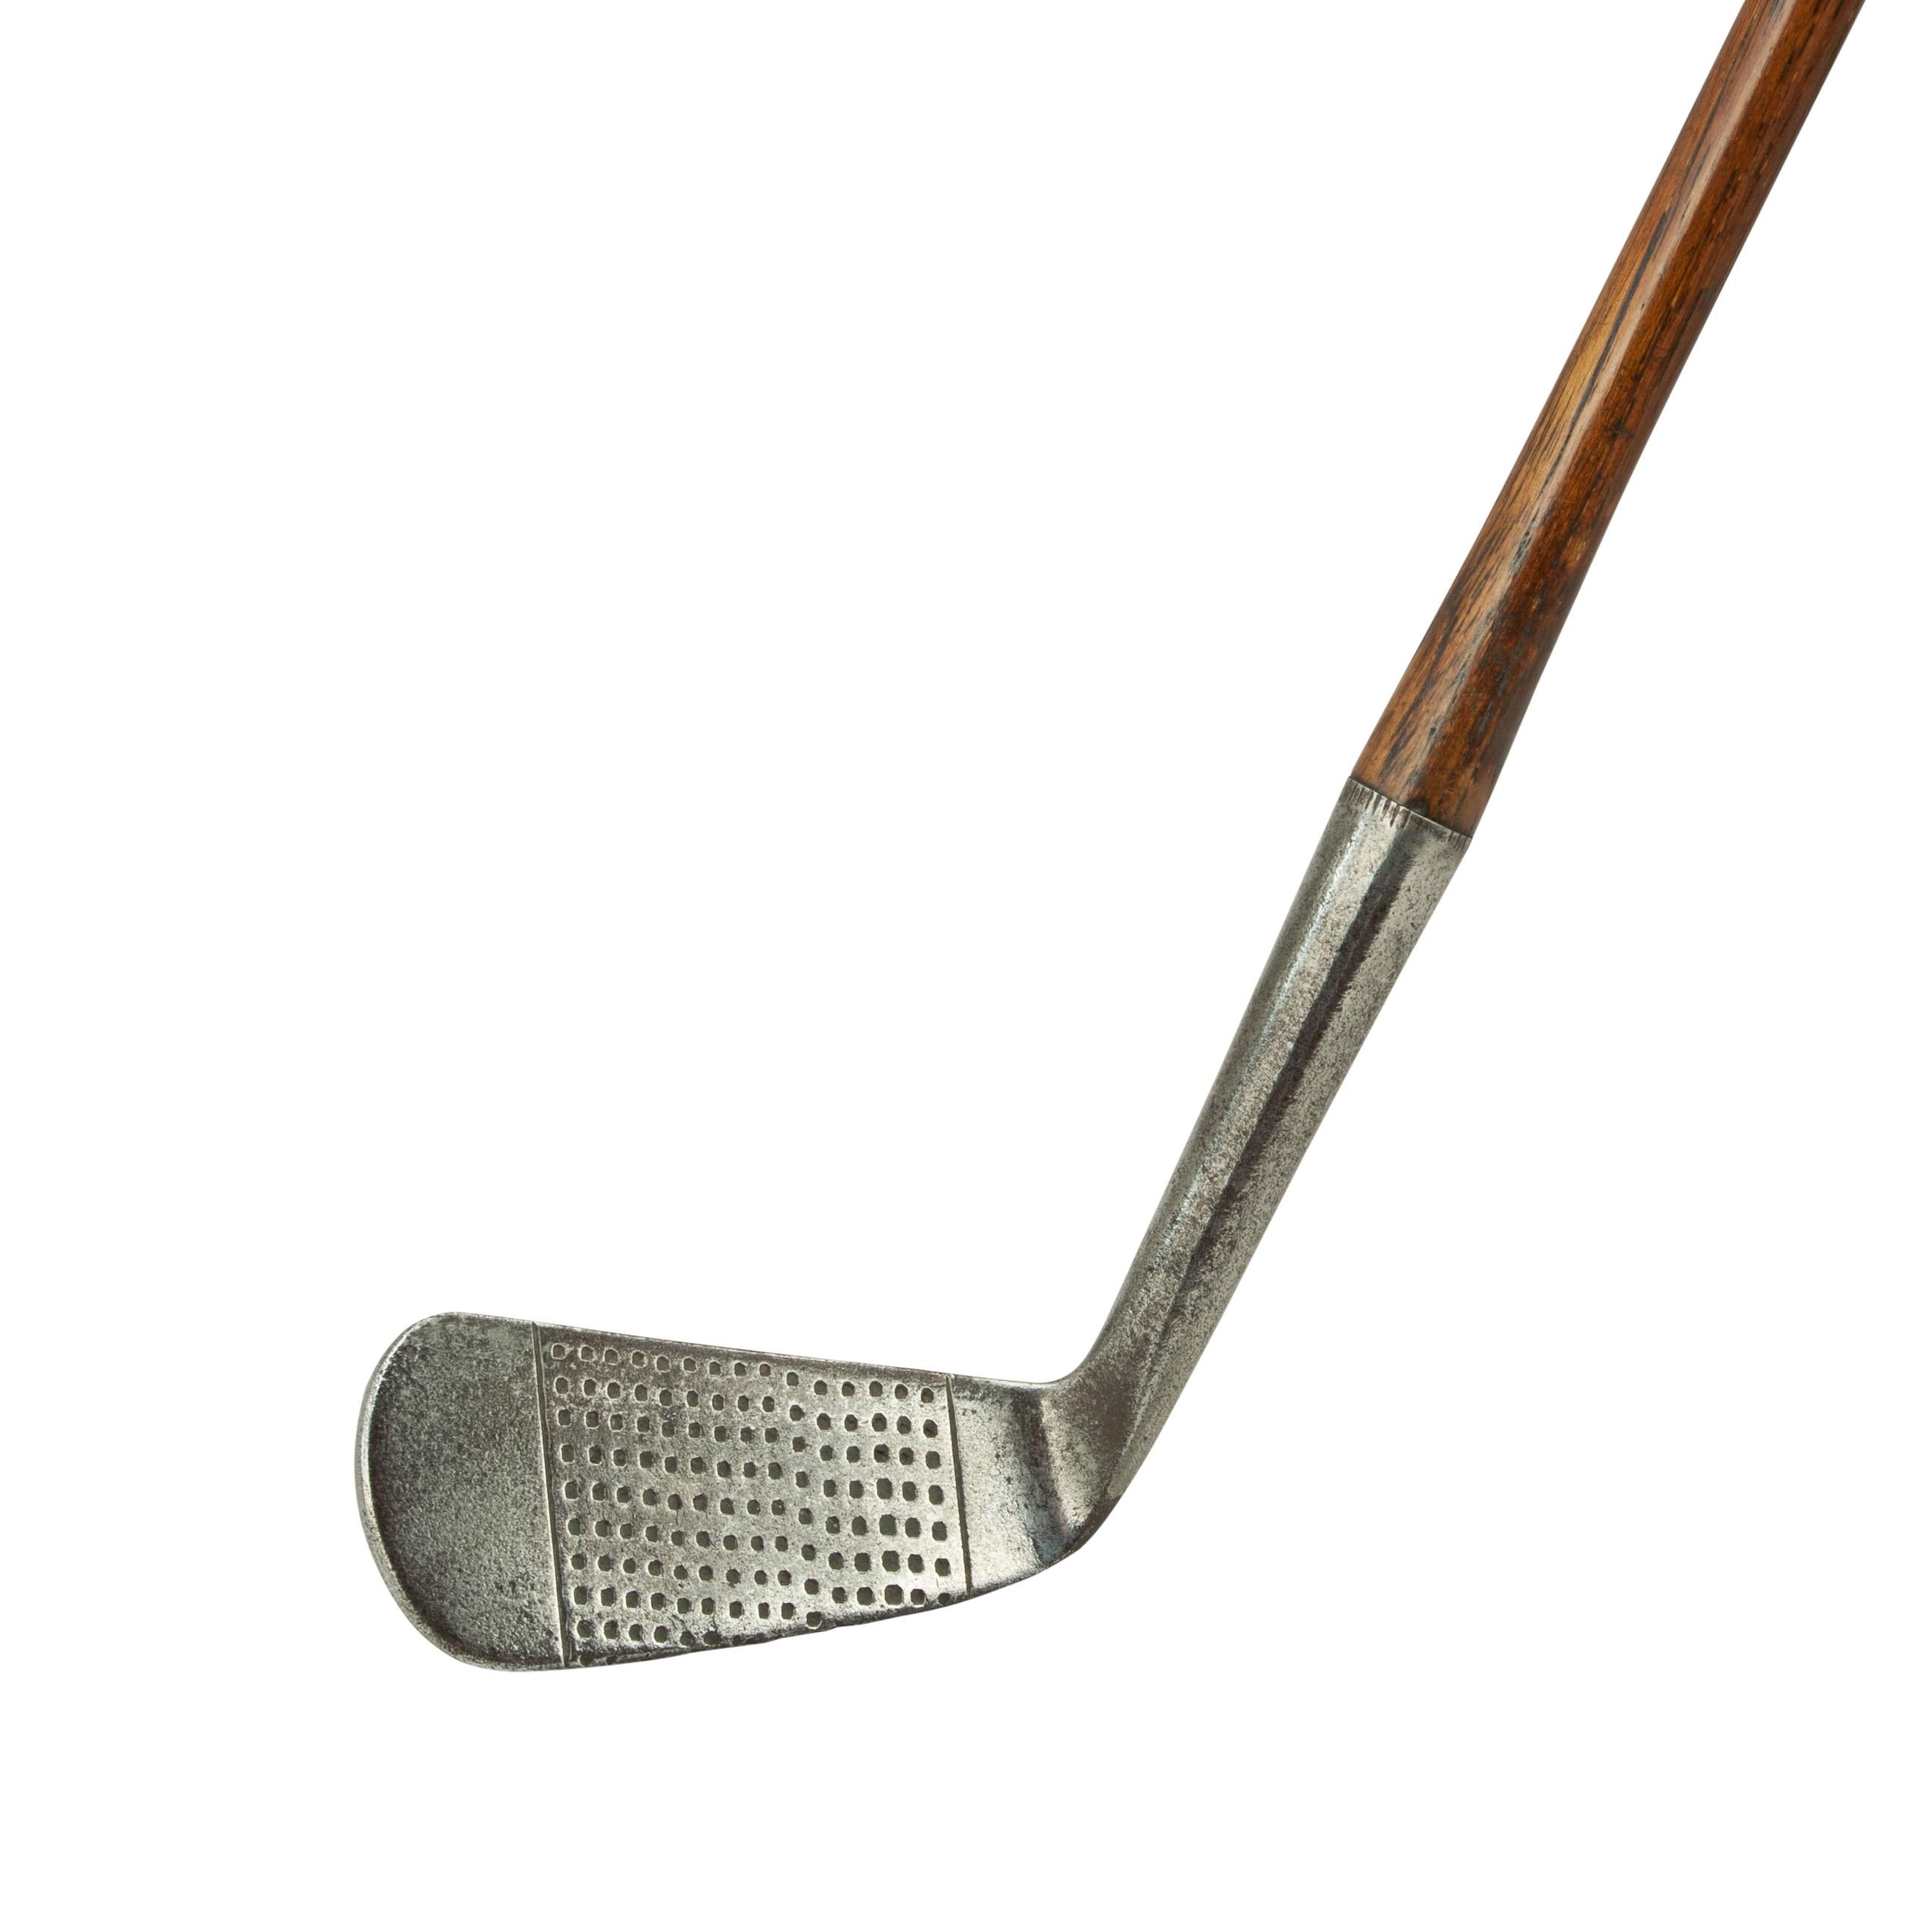 Vintage hickory golf club by Tom Stewart, St Andrews.
A diamond back Mid iron by Tom Stewart of St. Andrews and retailed by Lane Crawford Ltd., Hong Kong. The hickory shaft stamped 'T. Auchterlonie, St Andrews, and fitted with a suede leather grip.